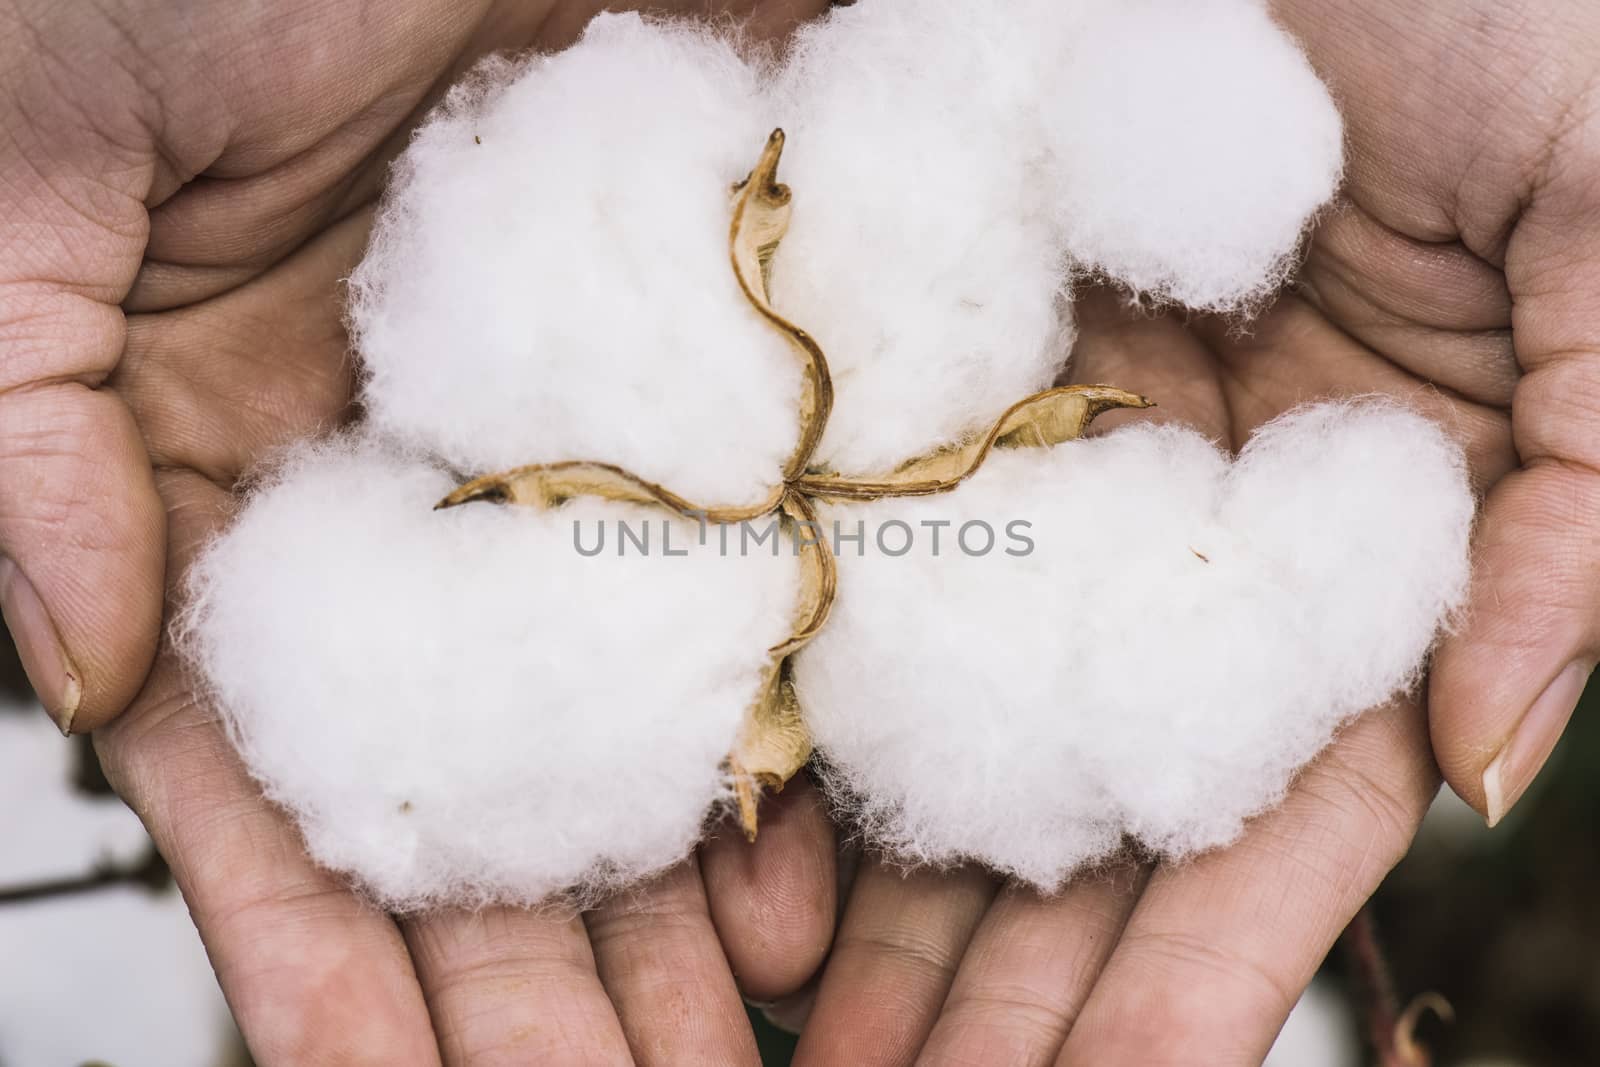 Field of cotton in the countryside ready for harvesting.